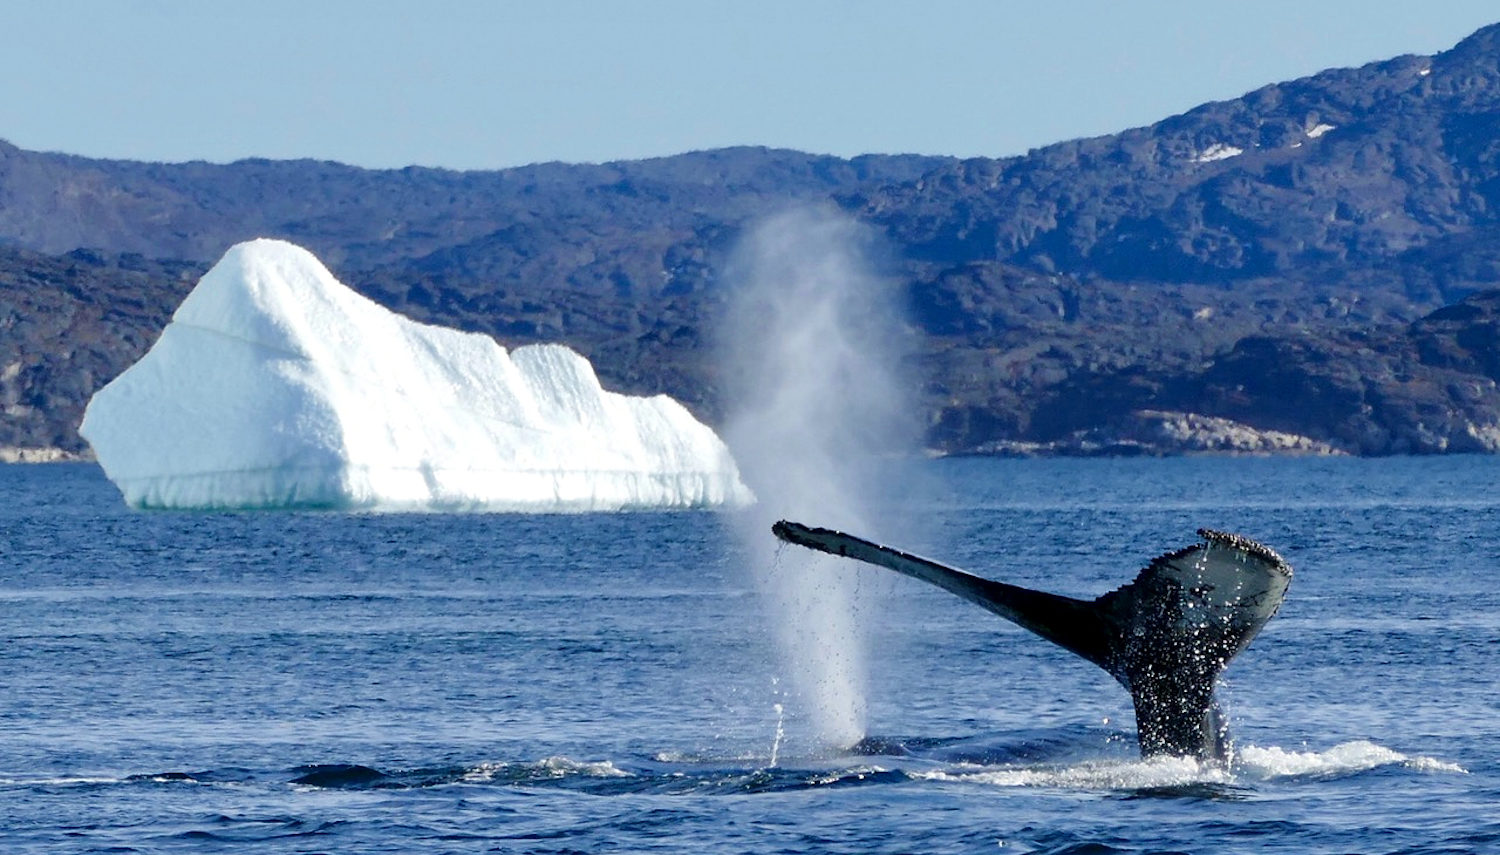 Vripack - Pioneer Explorer Yacht - Spotting whales - Journey of a lifetime